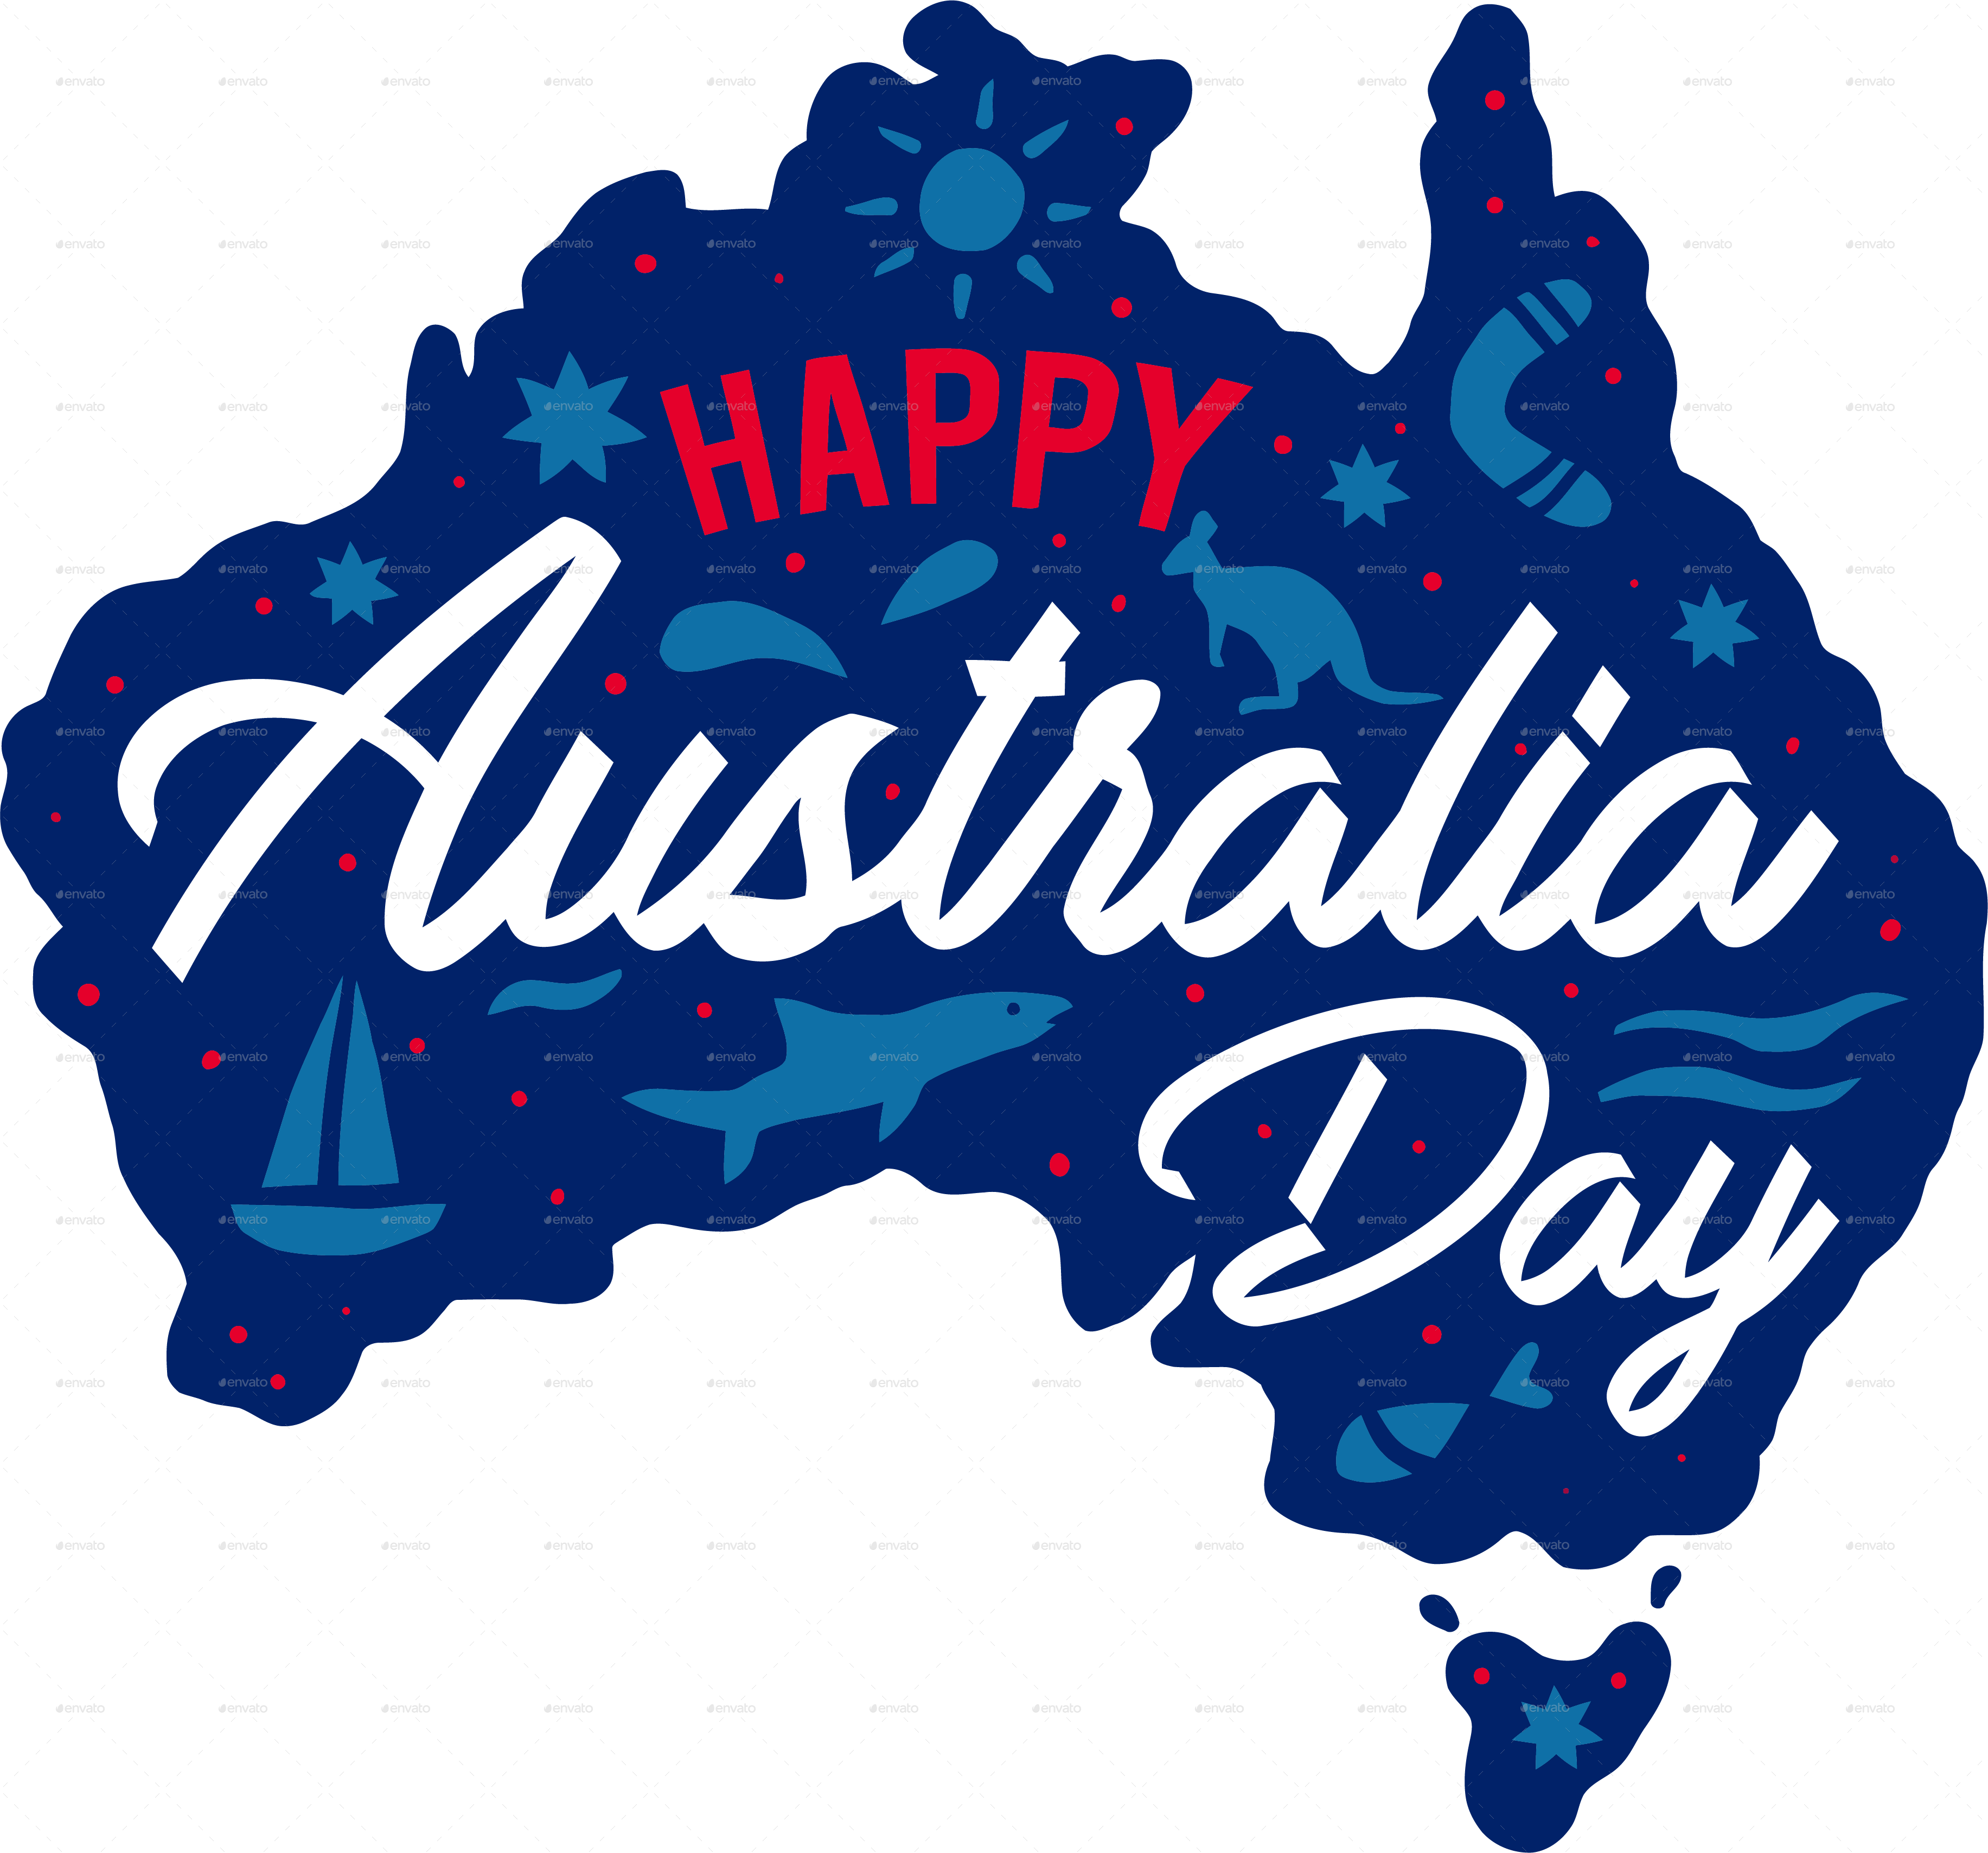 Happy Australia Day Quotes Image Messages SMS Greetings Whatsapp Status & Dp